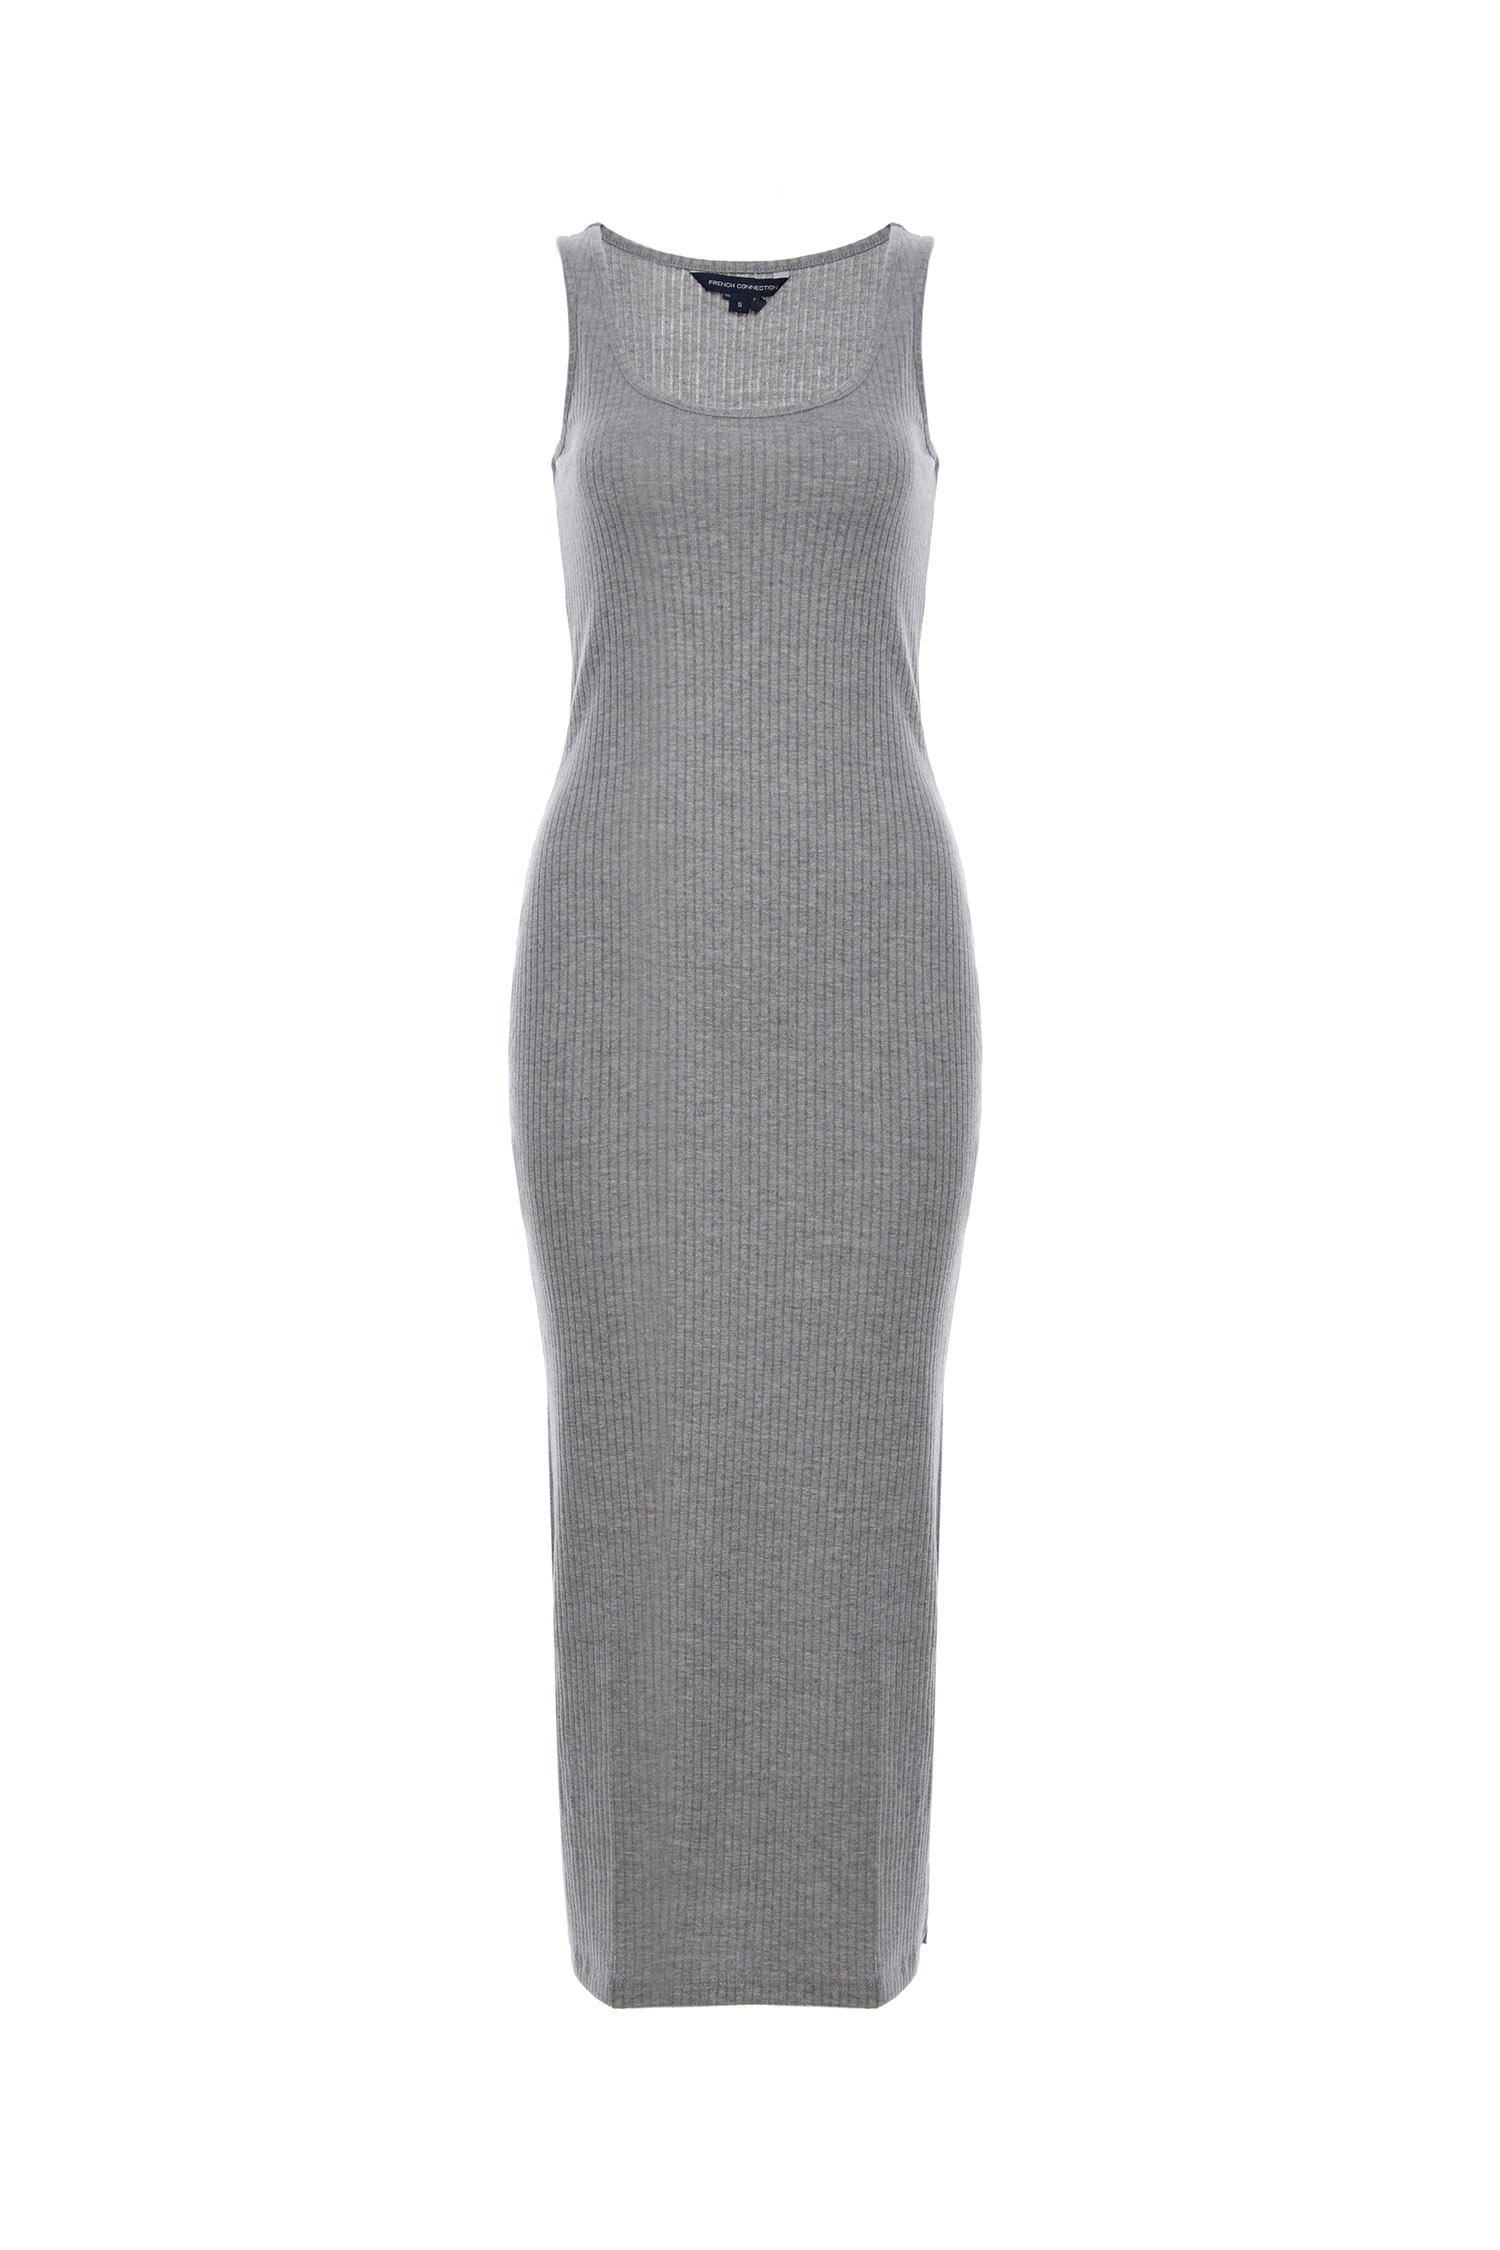 French Connection Sleeveless Bodycon Dress in Grey | DAILYLOOK